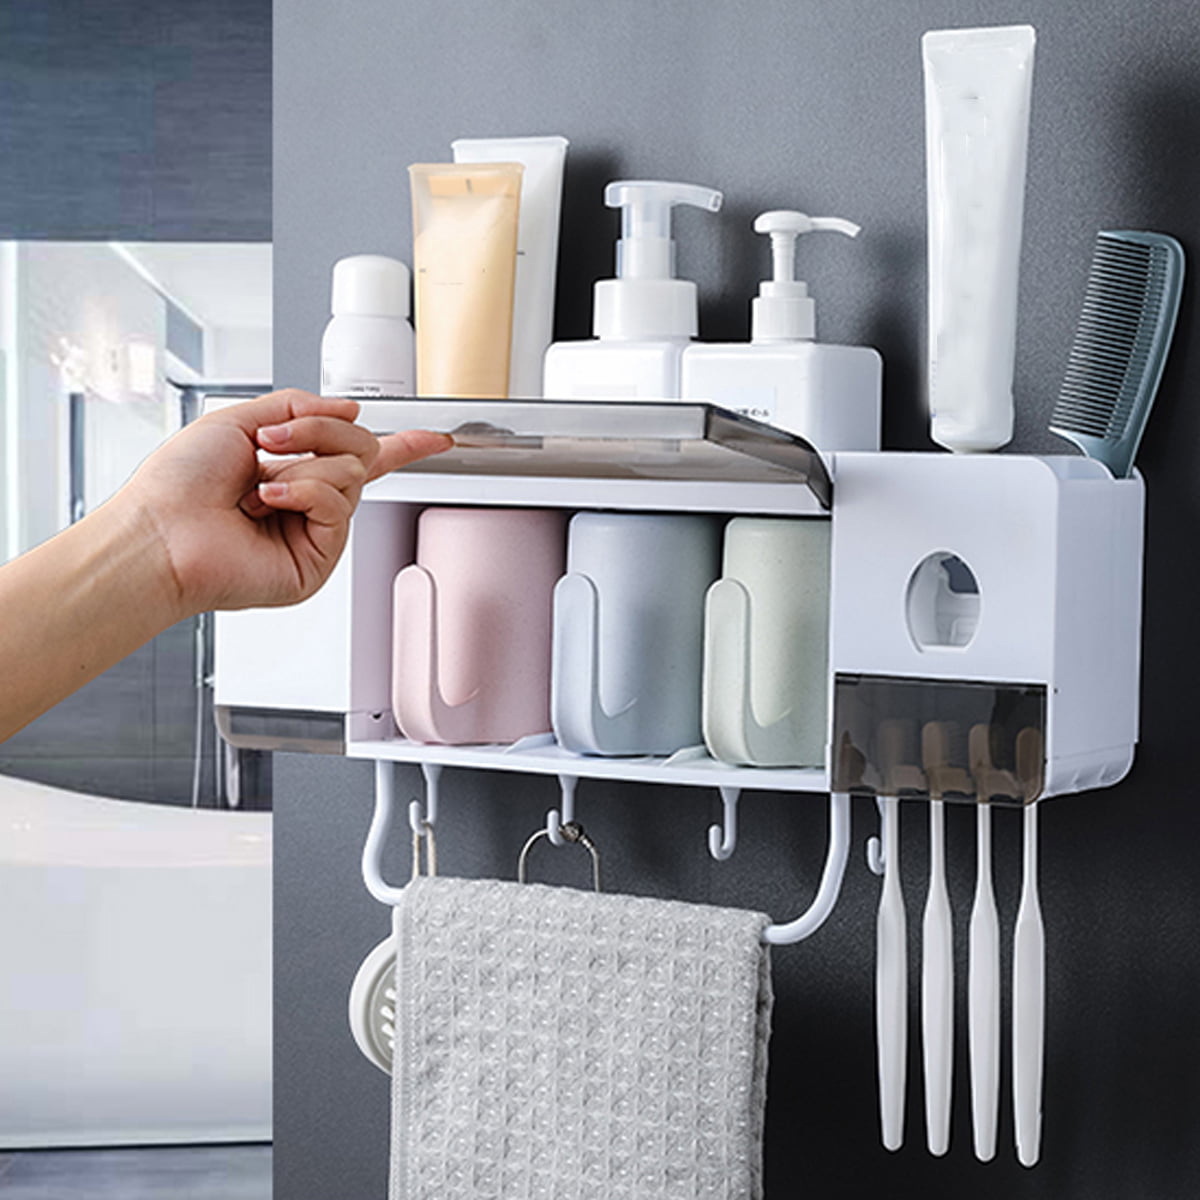 Automatic Toothpaste Dispenser Wall Mount Toothbrush Holder Bathroom Accessories 